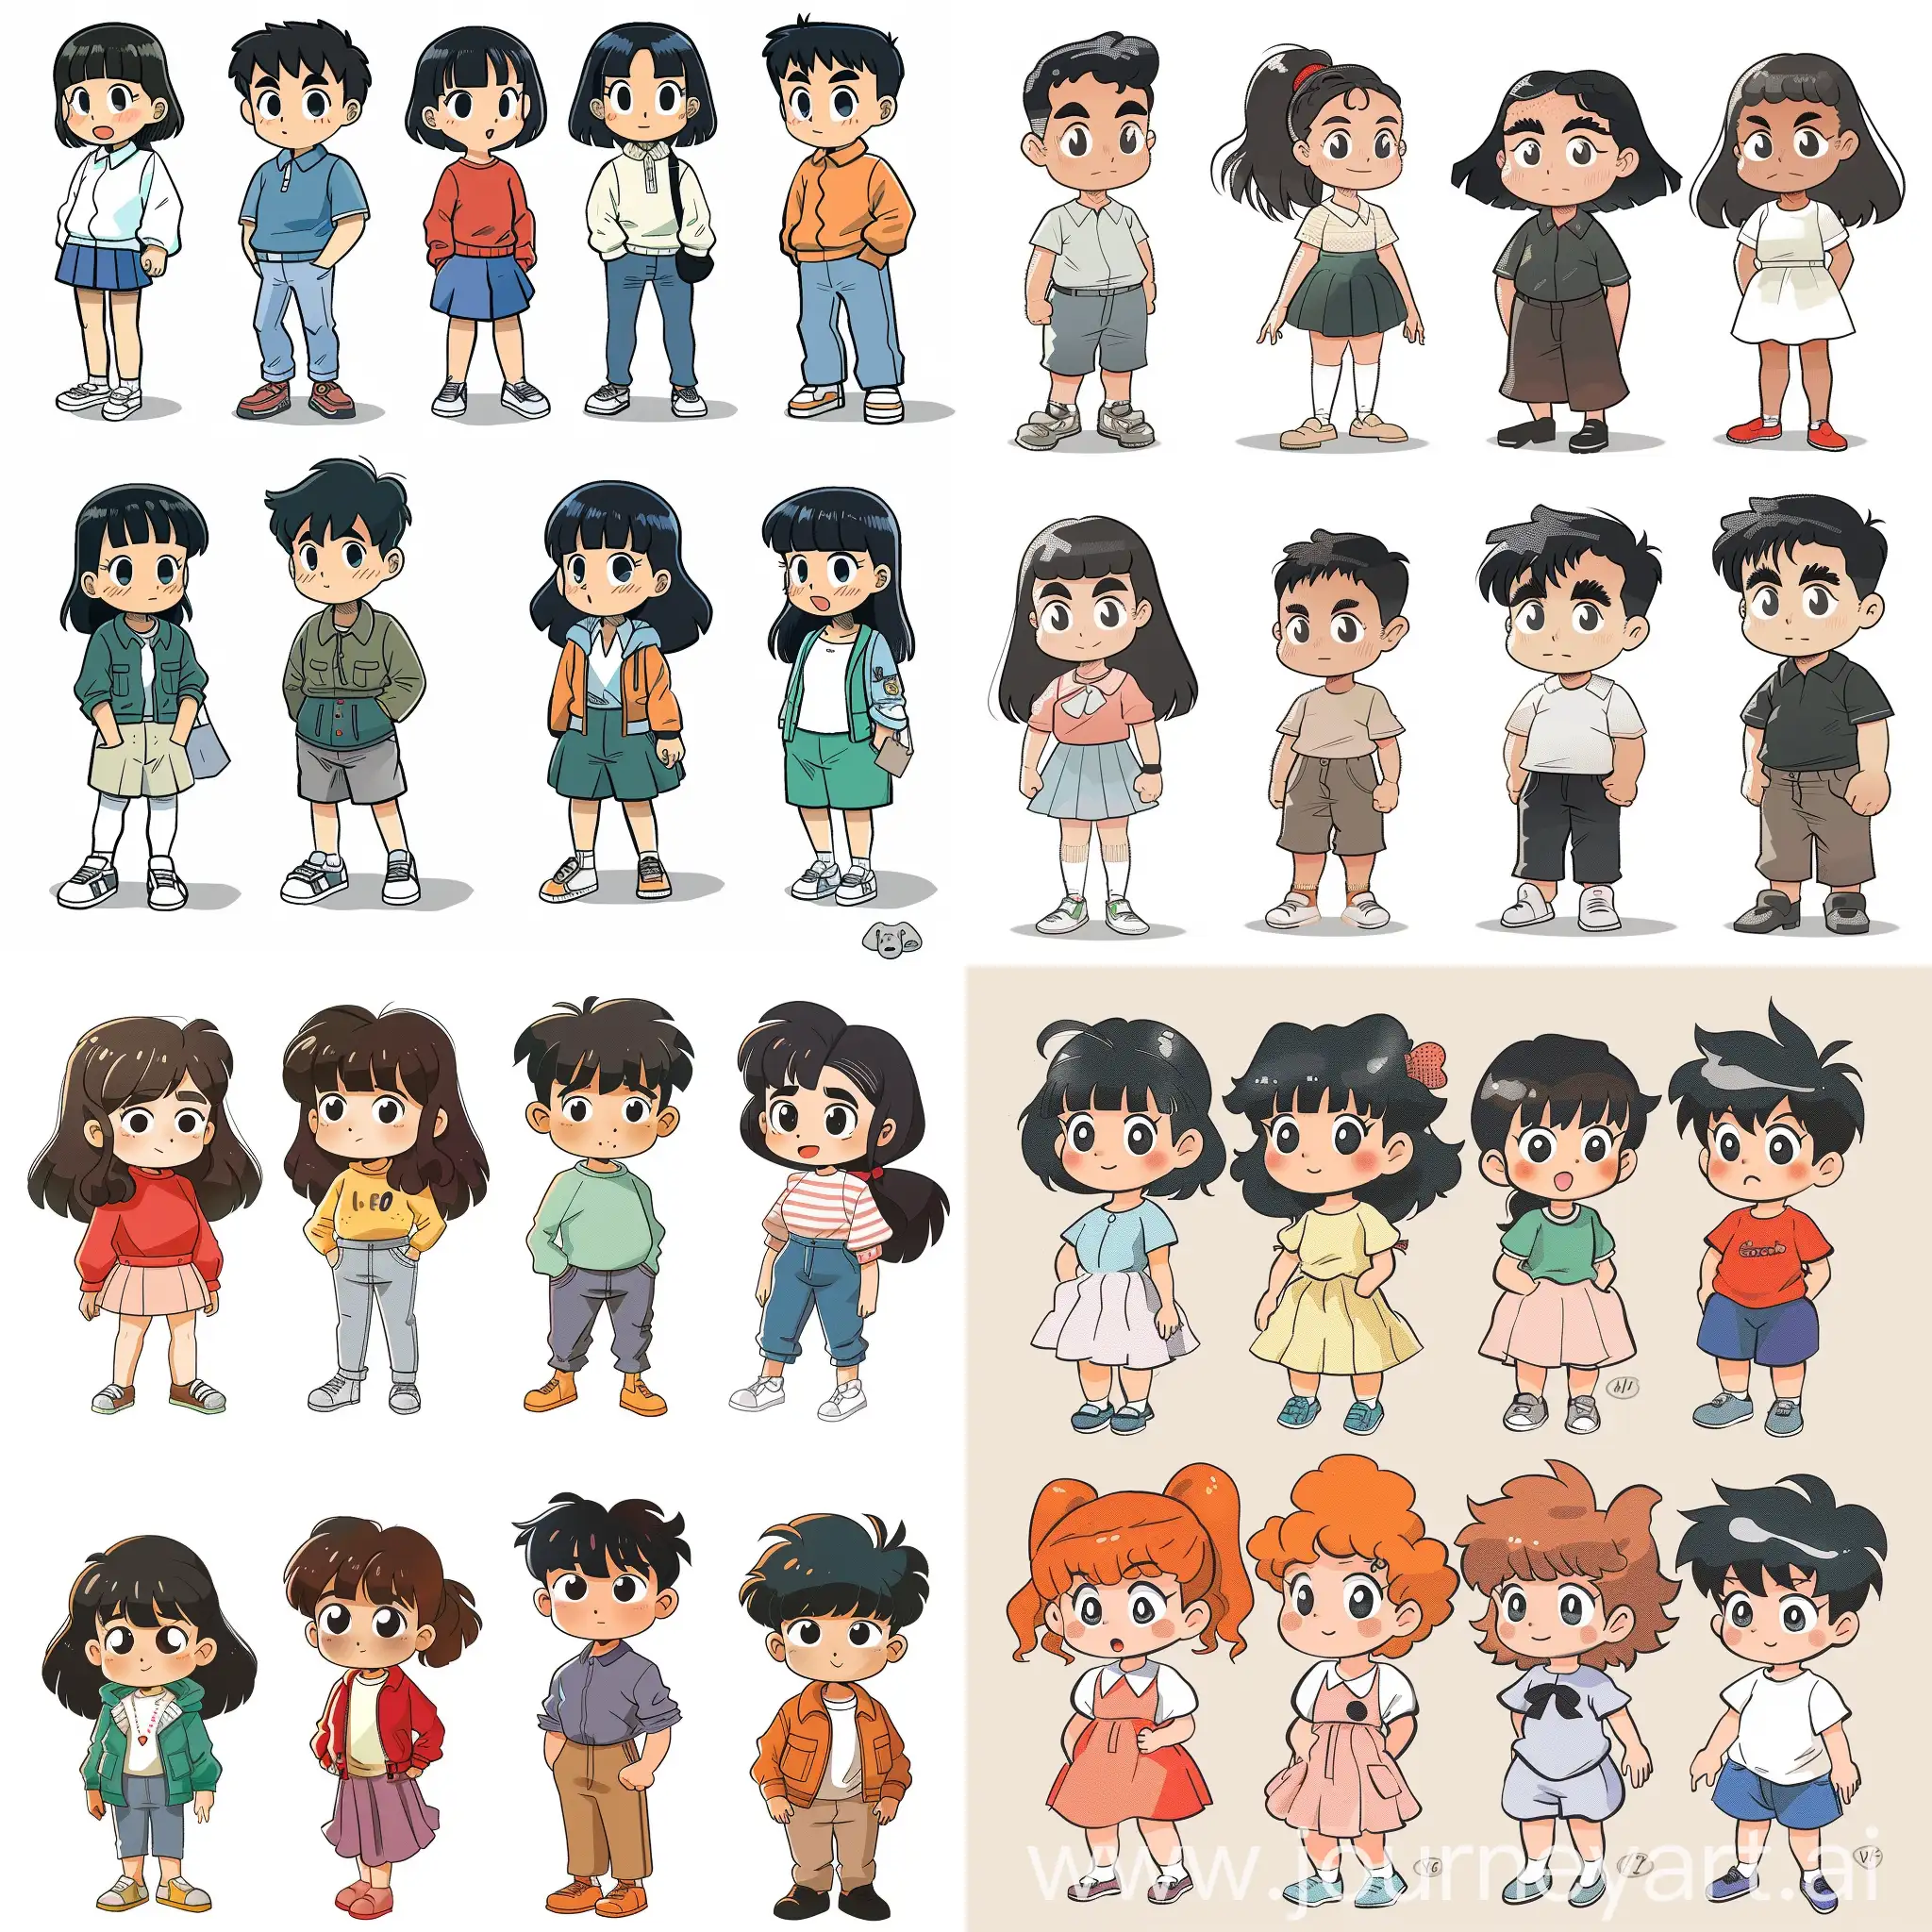 Colorful-Anime-Cartoon-Characters-Playful-Ensemble-of-Five-Female-and-Three-Male-Figures-in-Crayon-Shinchan-Style